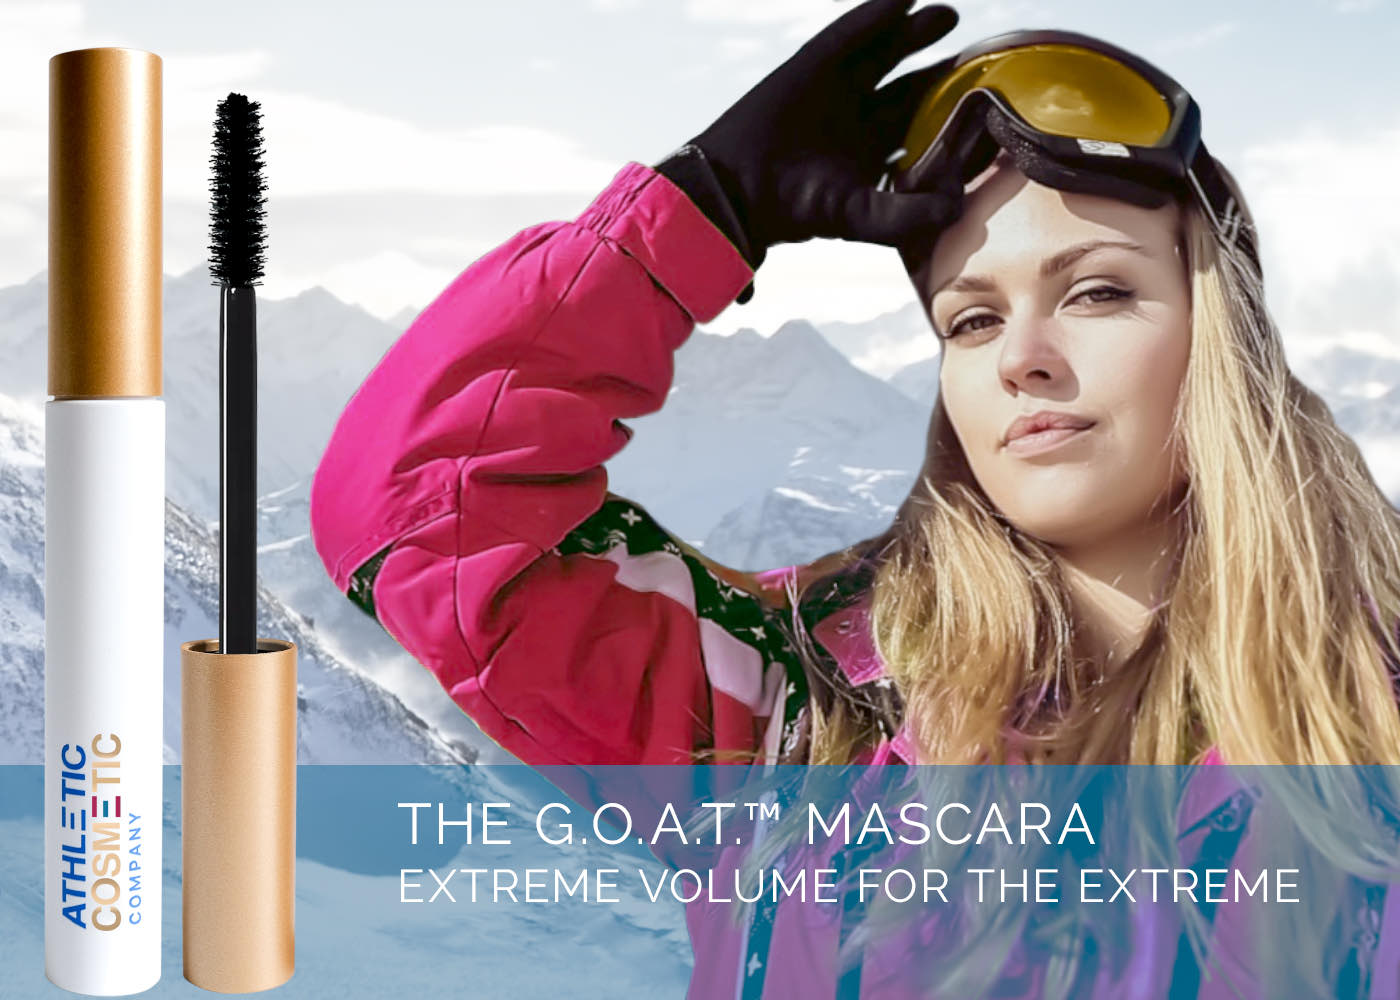 THE G.O.A.T.™ MASCARA EXTREME VOLUME FOR THE EXTREME